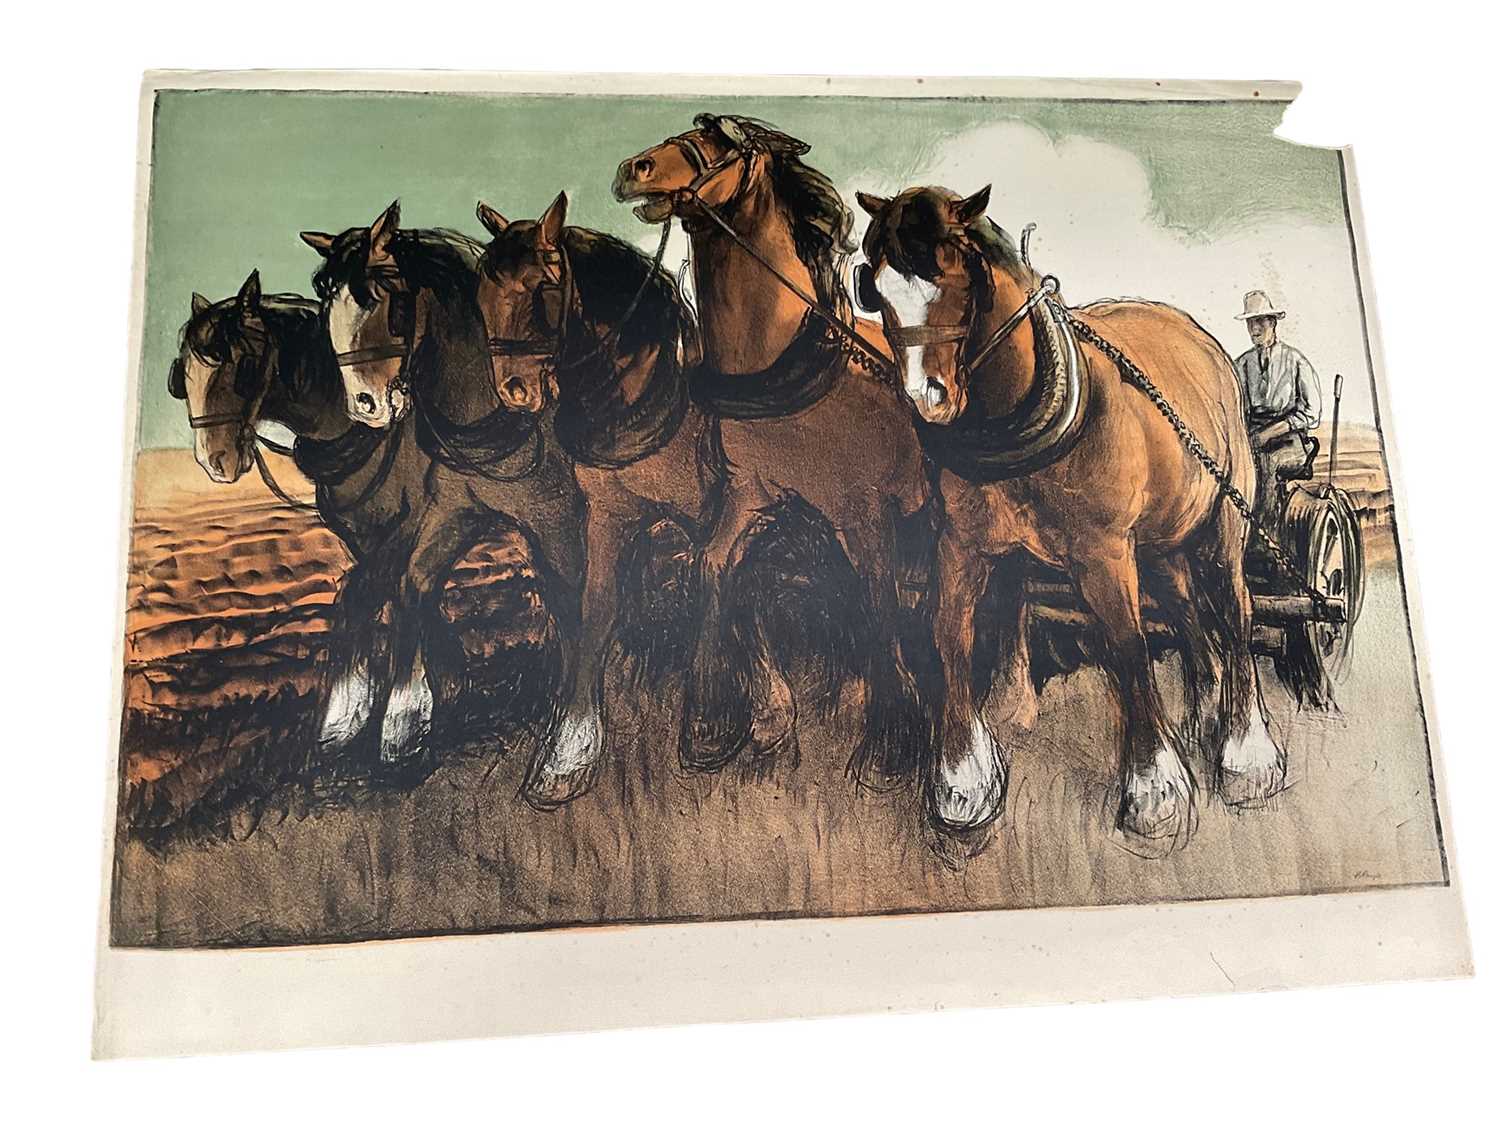 Lot 73 - Gerald Spencer Pryse (1882-1956) coloured lithograph, Scenes of the Empire series - Plough team, signed, image 89 x 125cm. NB - Produced for the 1924 British Empire Exhibition, this is a artists pr...